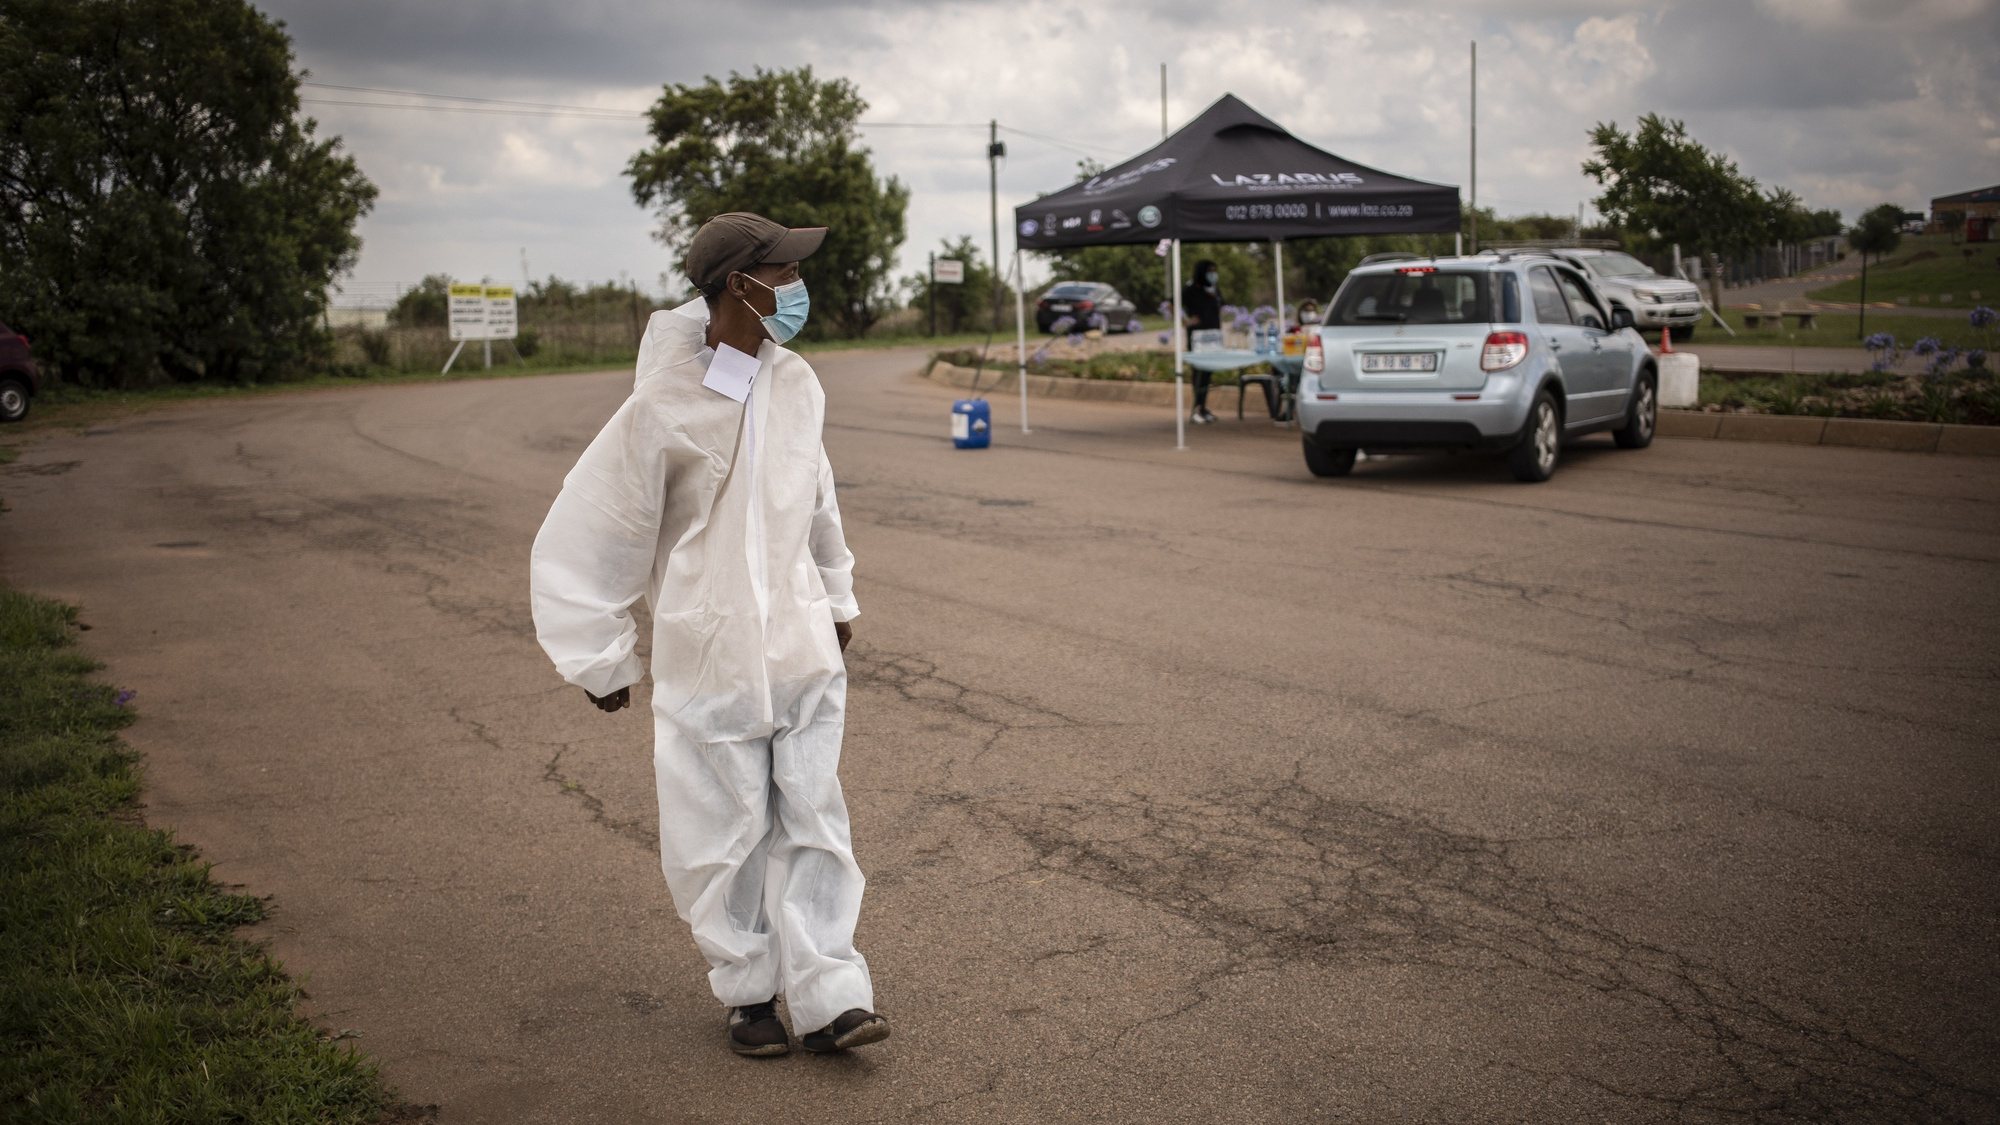 epa09642824 A volunteer wears personal protective equipment (PPE) at a Covid-19 drive-through vaccination facility at the Zwartkops Raceway in Pretoria, South Africa, 15 December 2021. The facility opened in an effort to increase vaccinations prior to the start of the annual end of year holidays, amid Omicron variant fears.  EPA/Kim Ludbrook